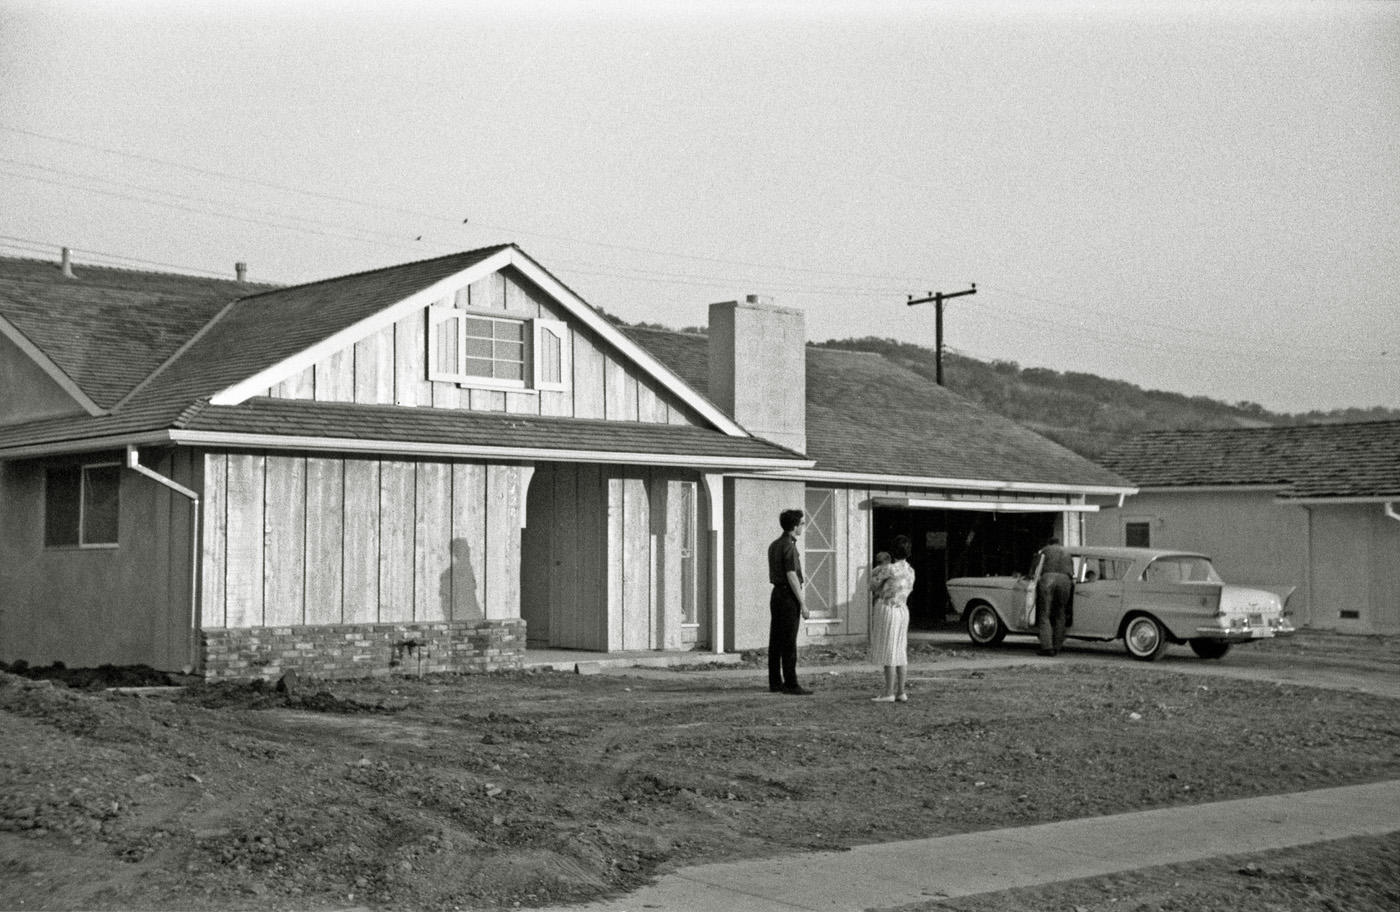 I thought I'd get on the 35mm black-and-white bandwagon with this one I shot on Kodak Plus-X in August 1963. A few weeks later my sister and her family moved into this, their new home in Diamond Bar, California. My brother (left) and I were down for a visit, so we all piled into their 1959 Rambler and headed out from their then-home base in South Gate to look the new place over. My sister is holding my niece, then 6 months old; I, seventeen years old, am behind the lens of my Kodak Retinette, then nine months old. Two years later, I stood on their front walk, turned around and took this shot. View full size.